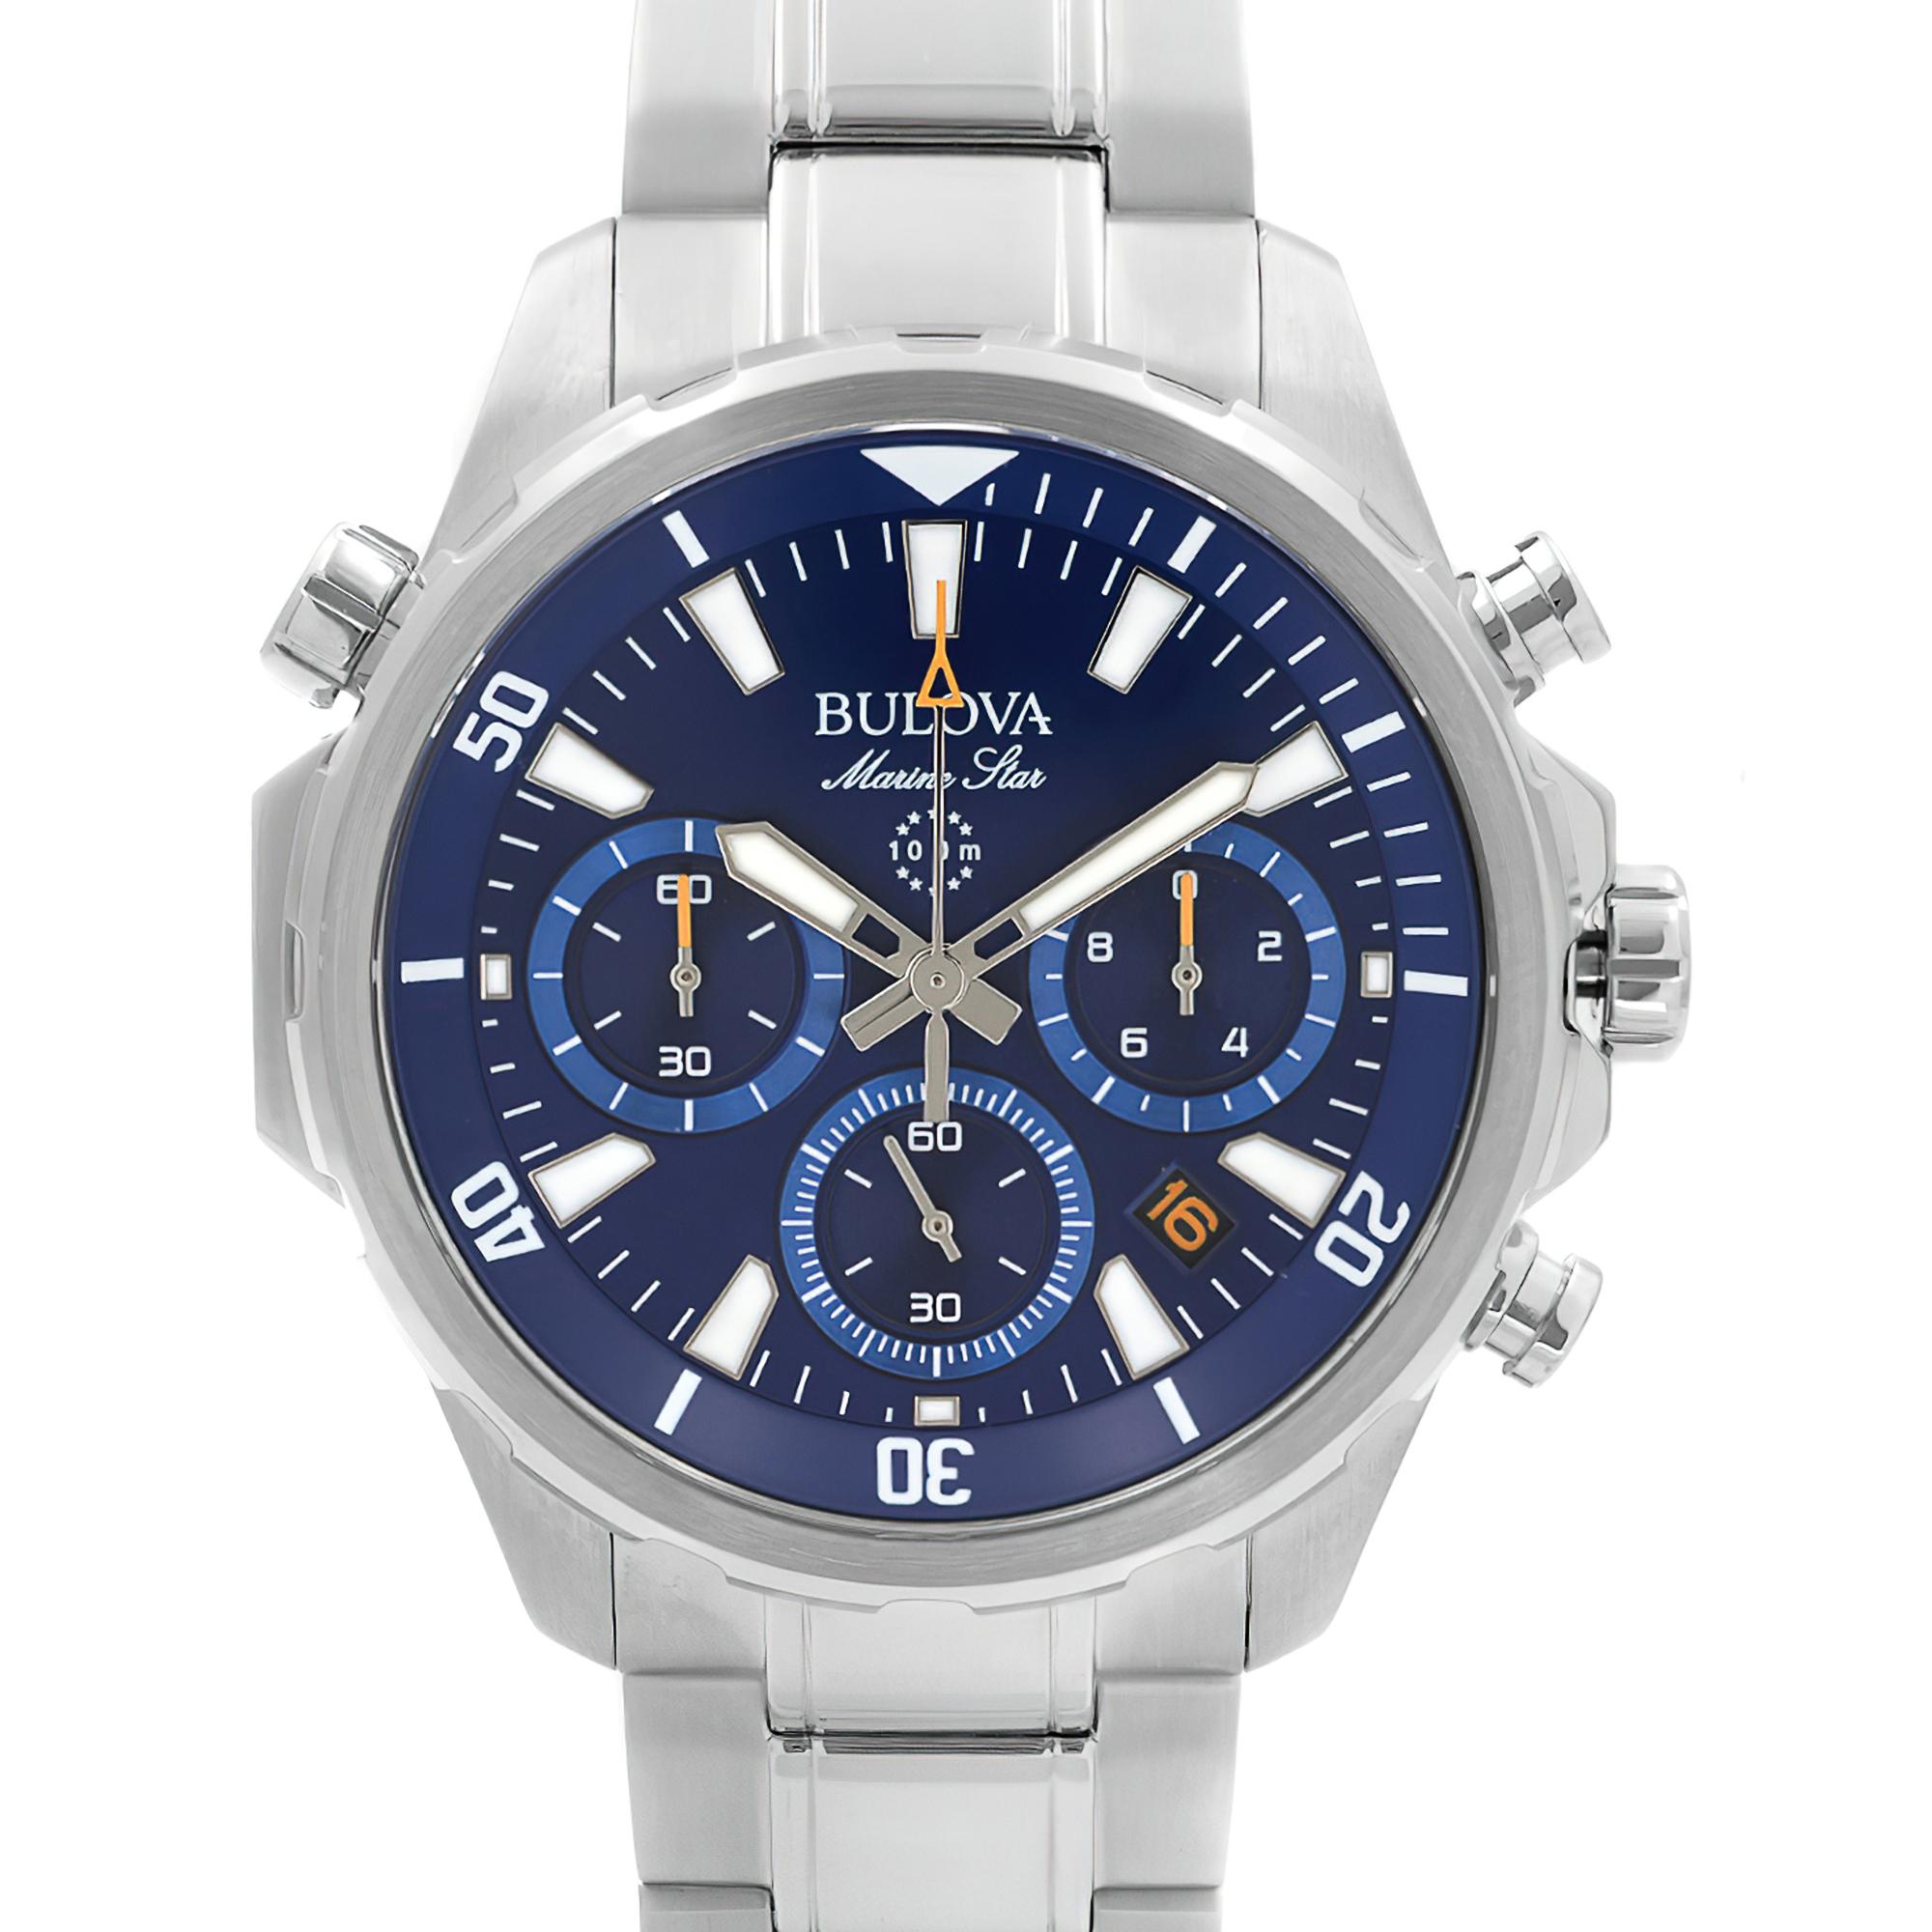 Unworn Bulova Marine Star Quartz Men's Watch 96B256. Original Box and Papers are Included. This Beautiful Timepiece is Powered by Quartz (Battery) Movement And Features: Round Stainless Steel Case and Bracelet. Blue Dial with Luminous Silver-Tone